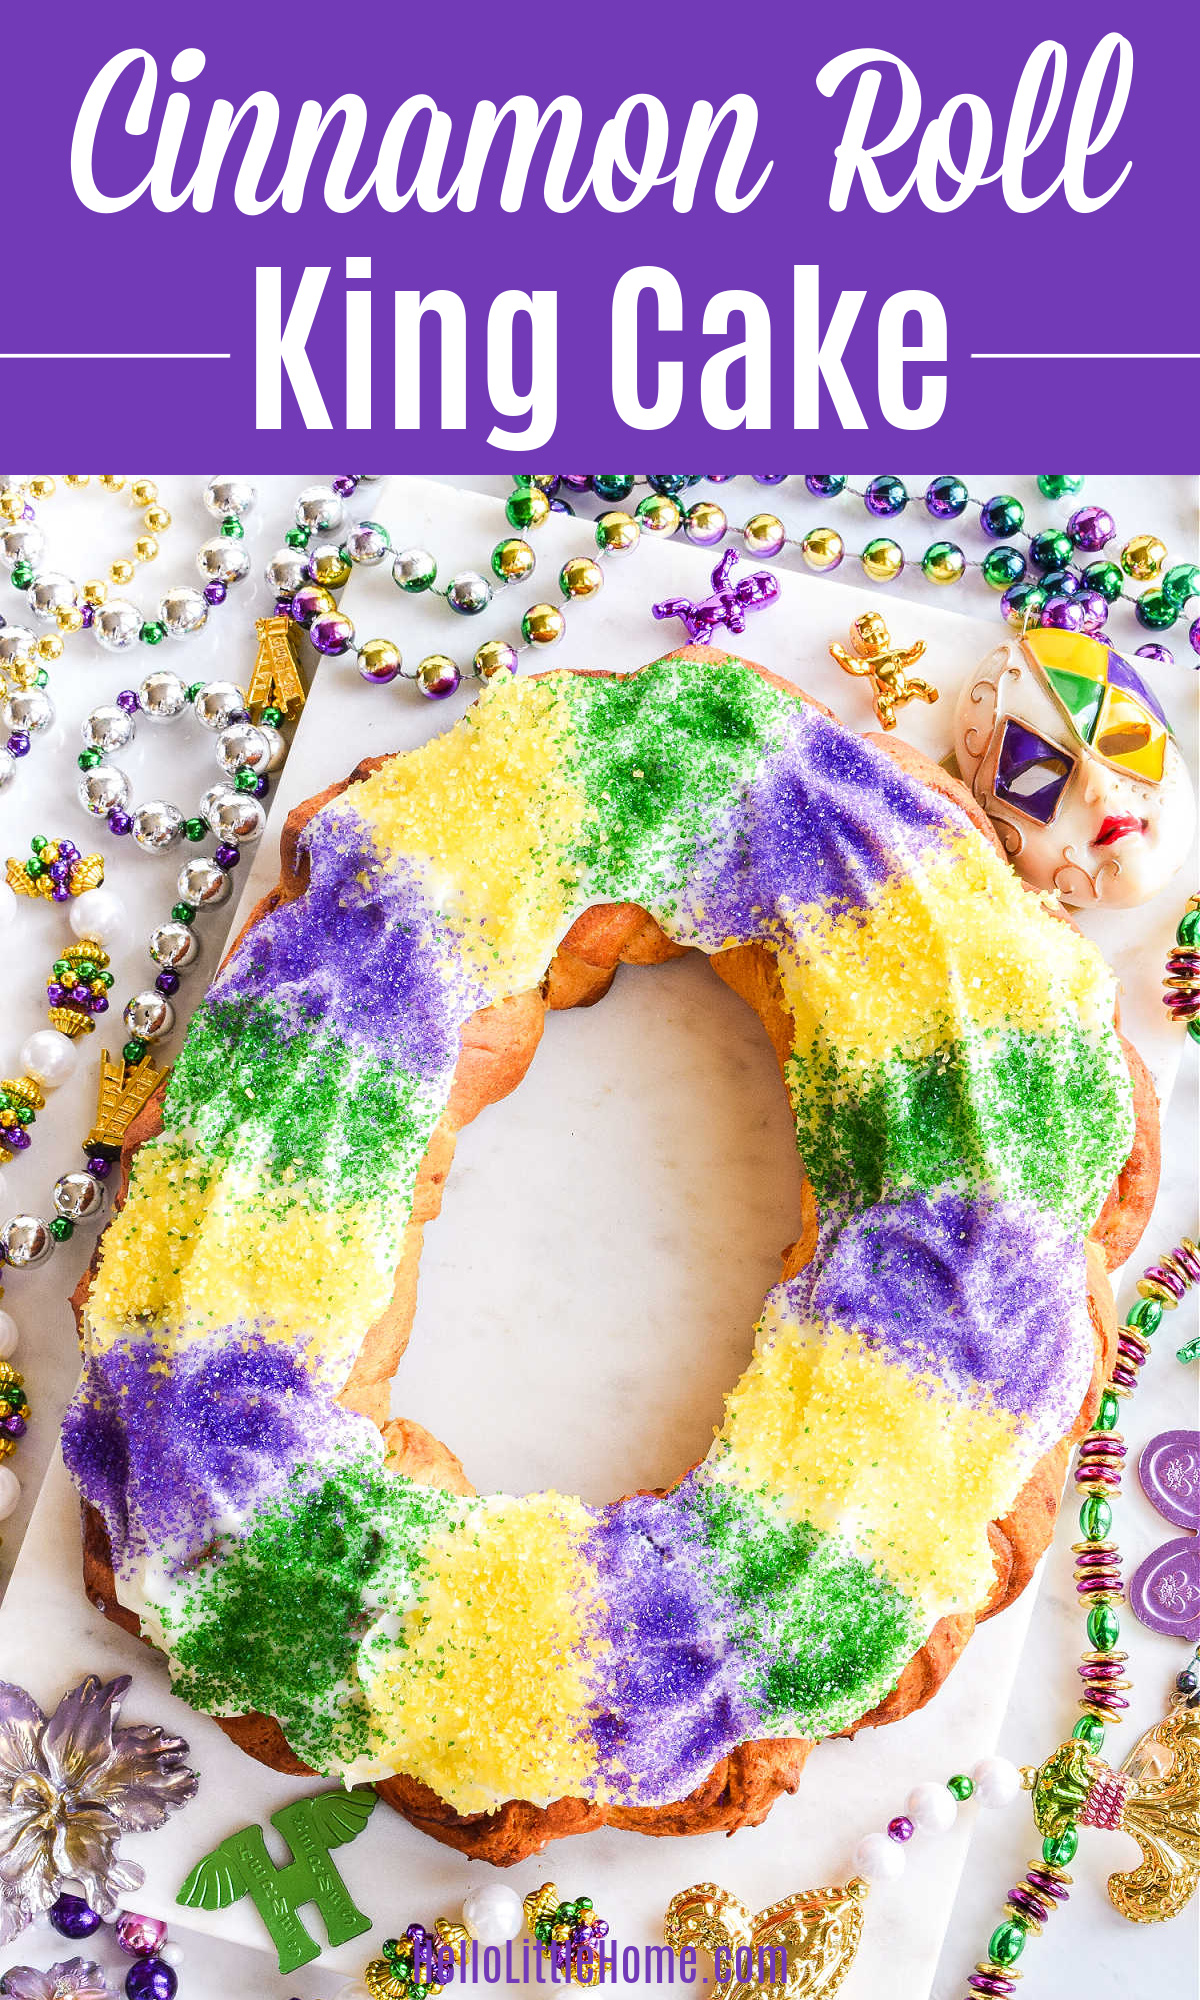 A Cinnamon Roll King Cake surrounded by Mardi Gras Beads and doubloons.